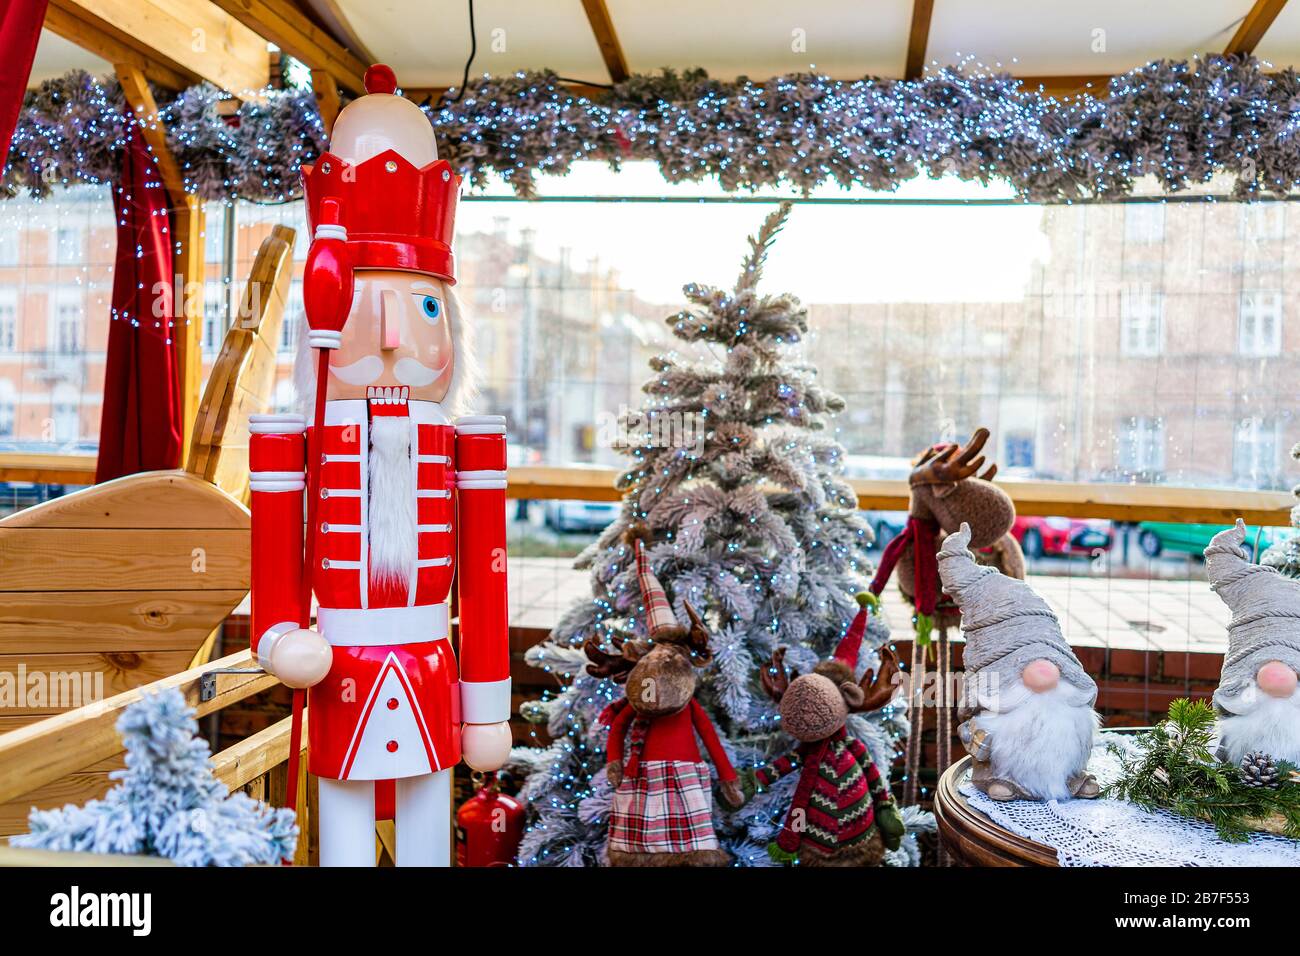 Warsaw, Poland - December 19, 2019: Christmas market in Warszawa old town with photo booth with New Year tree illumination decorations, gnome dwarf an Stock Photo